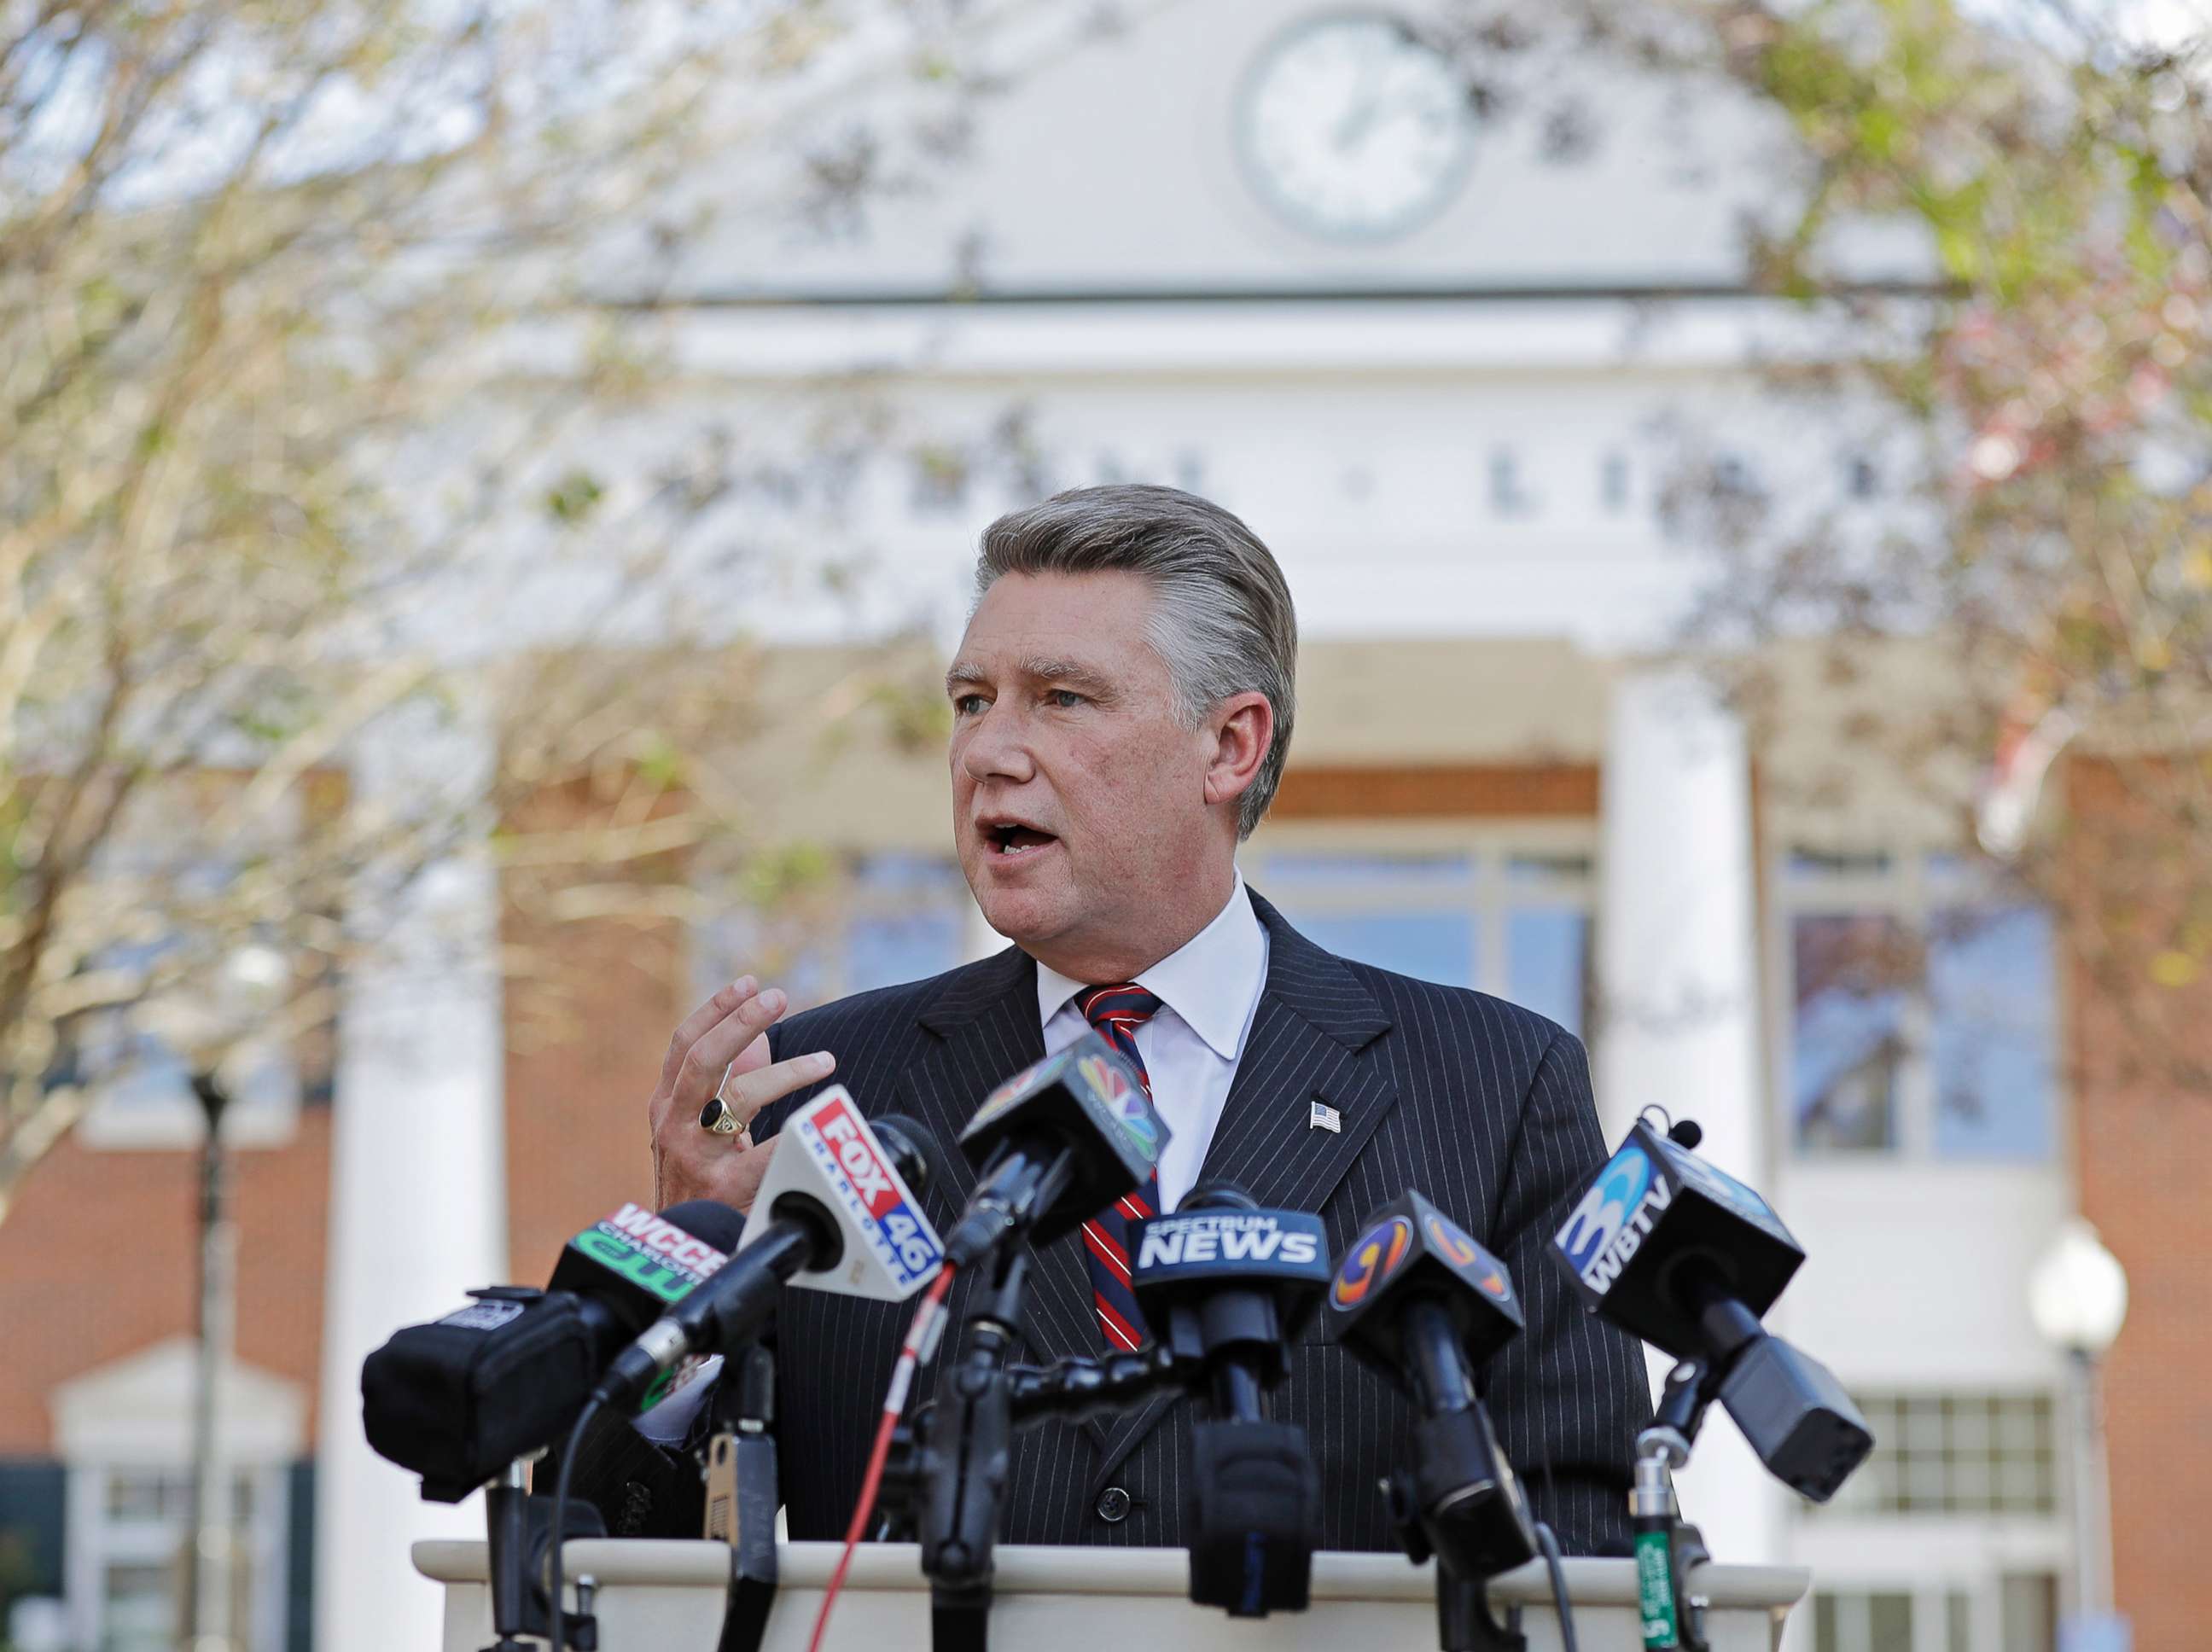 PHOTO: In this Nov. 7, 2018, file photo Mark Harris speaks to the media during a news conference in Matthews, N.C.